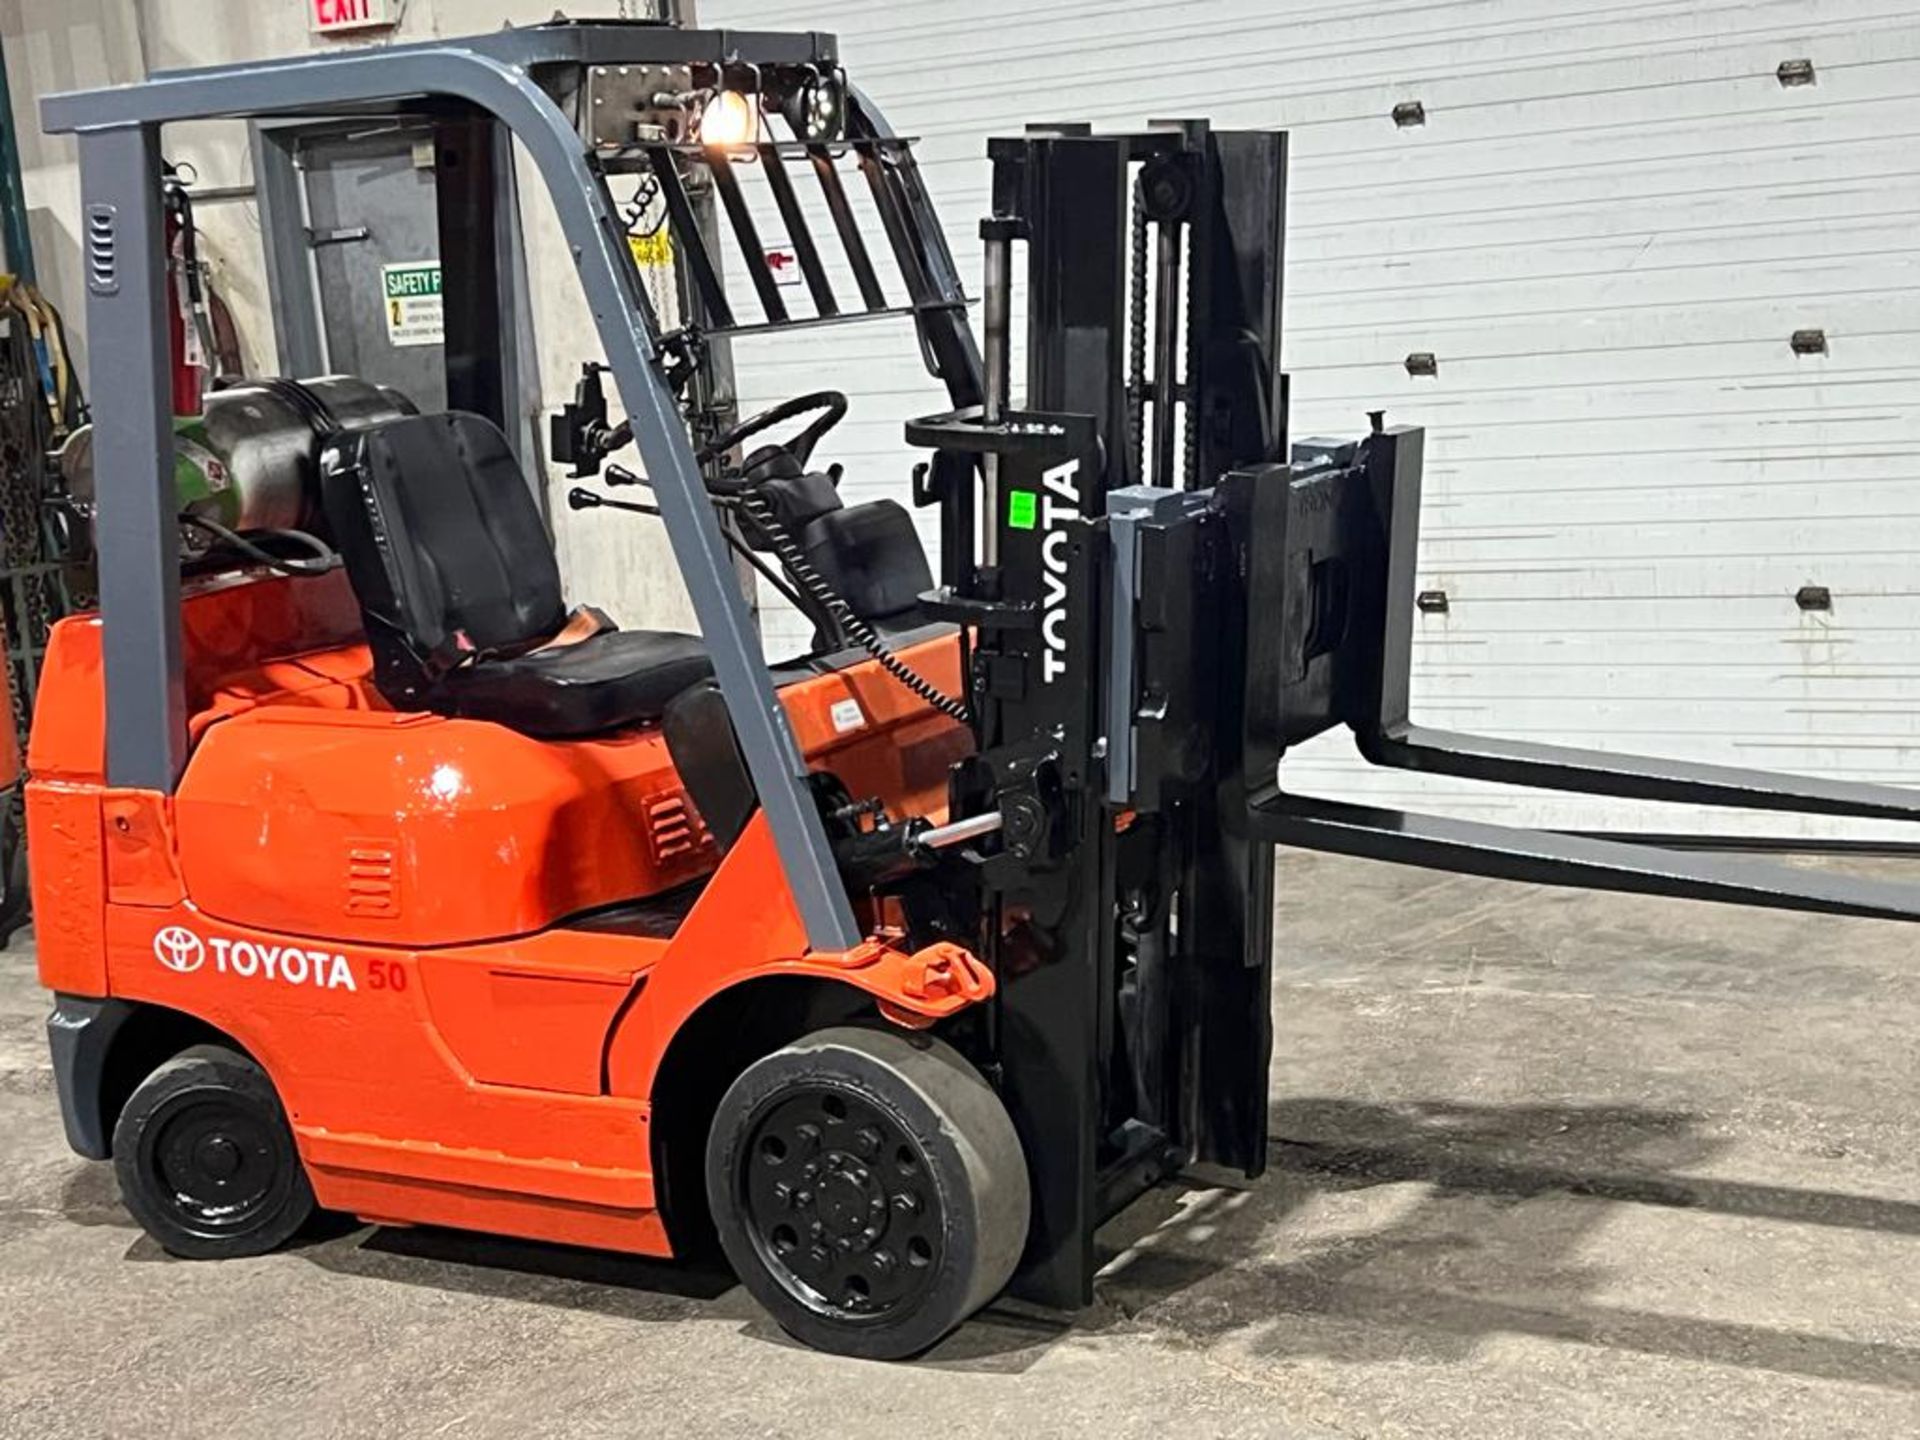 Toyota 5,000lbs Capacity Forklift LPG (propane) with Built On Scale and Trucker Mast - FREE CUSTOMS